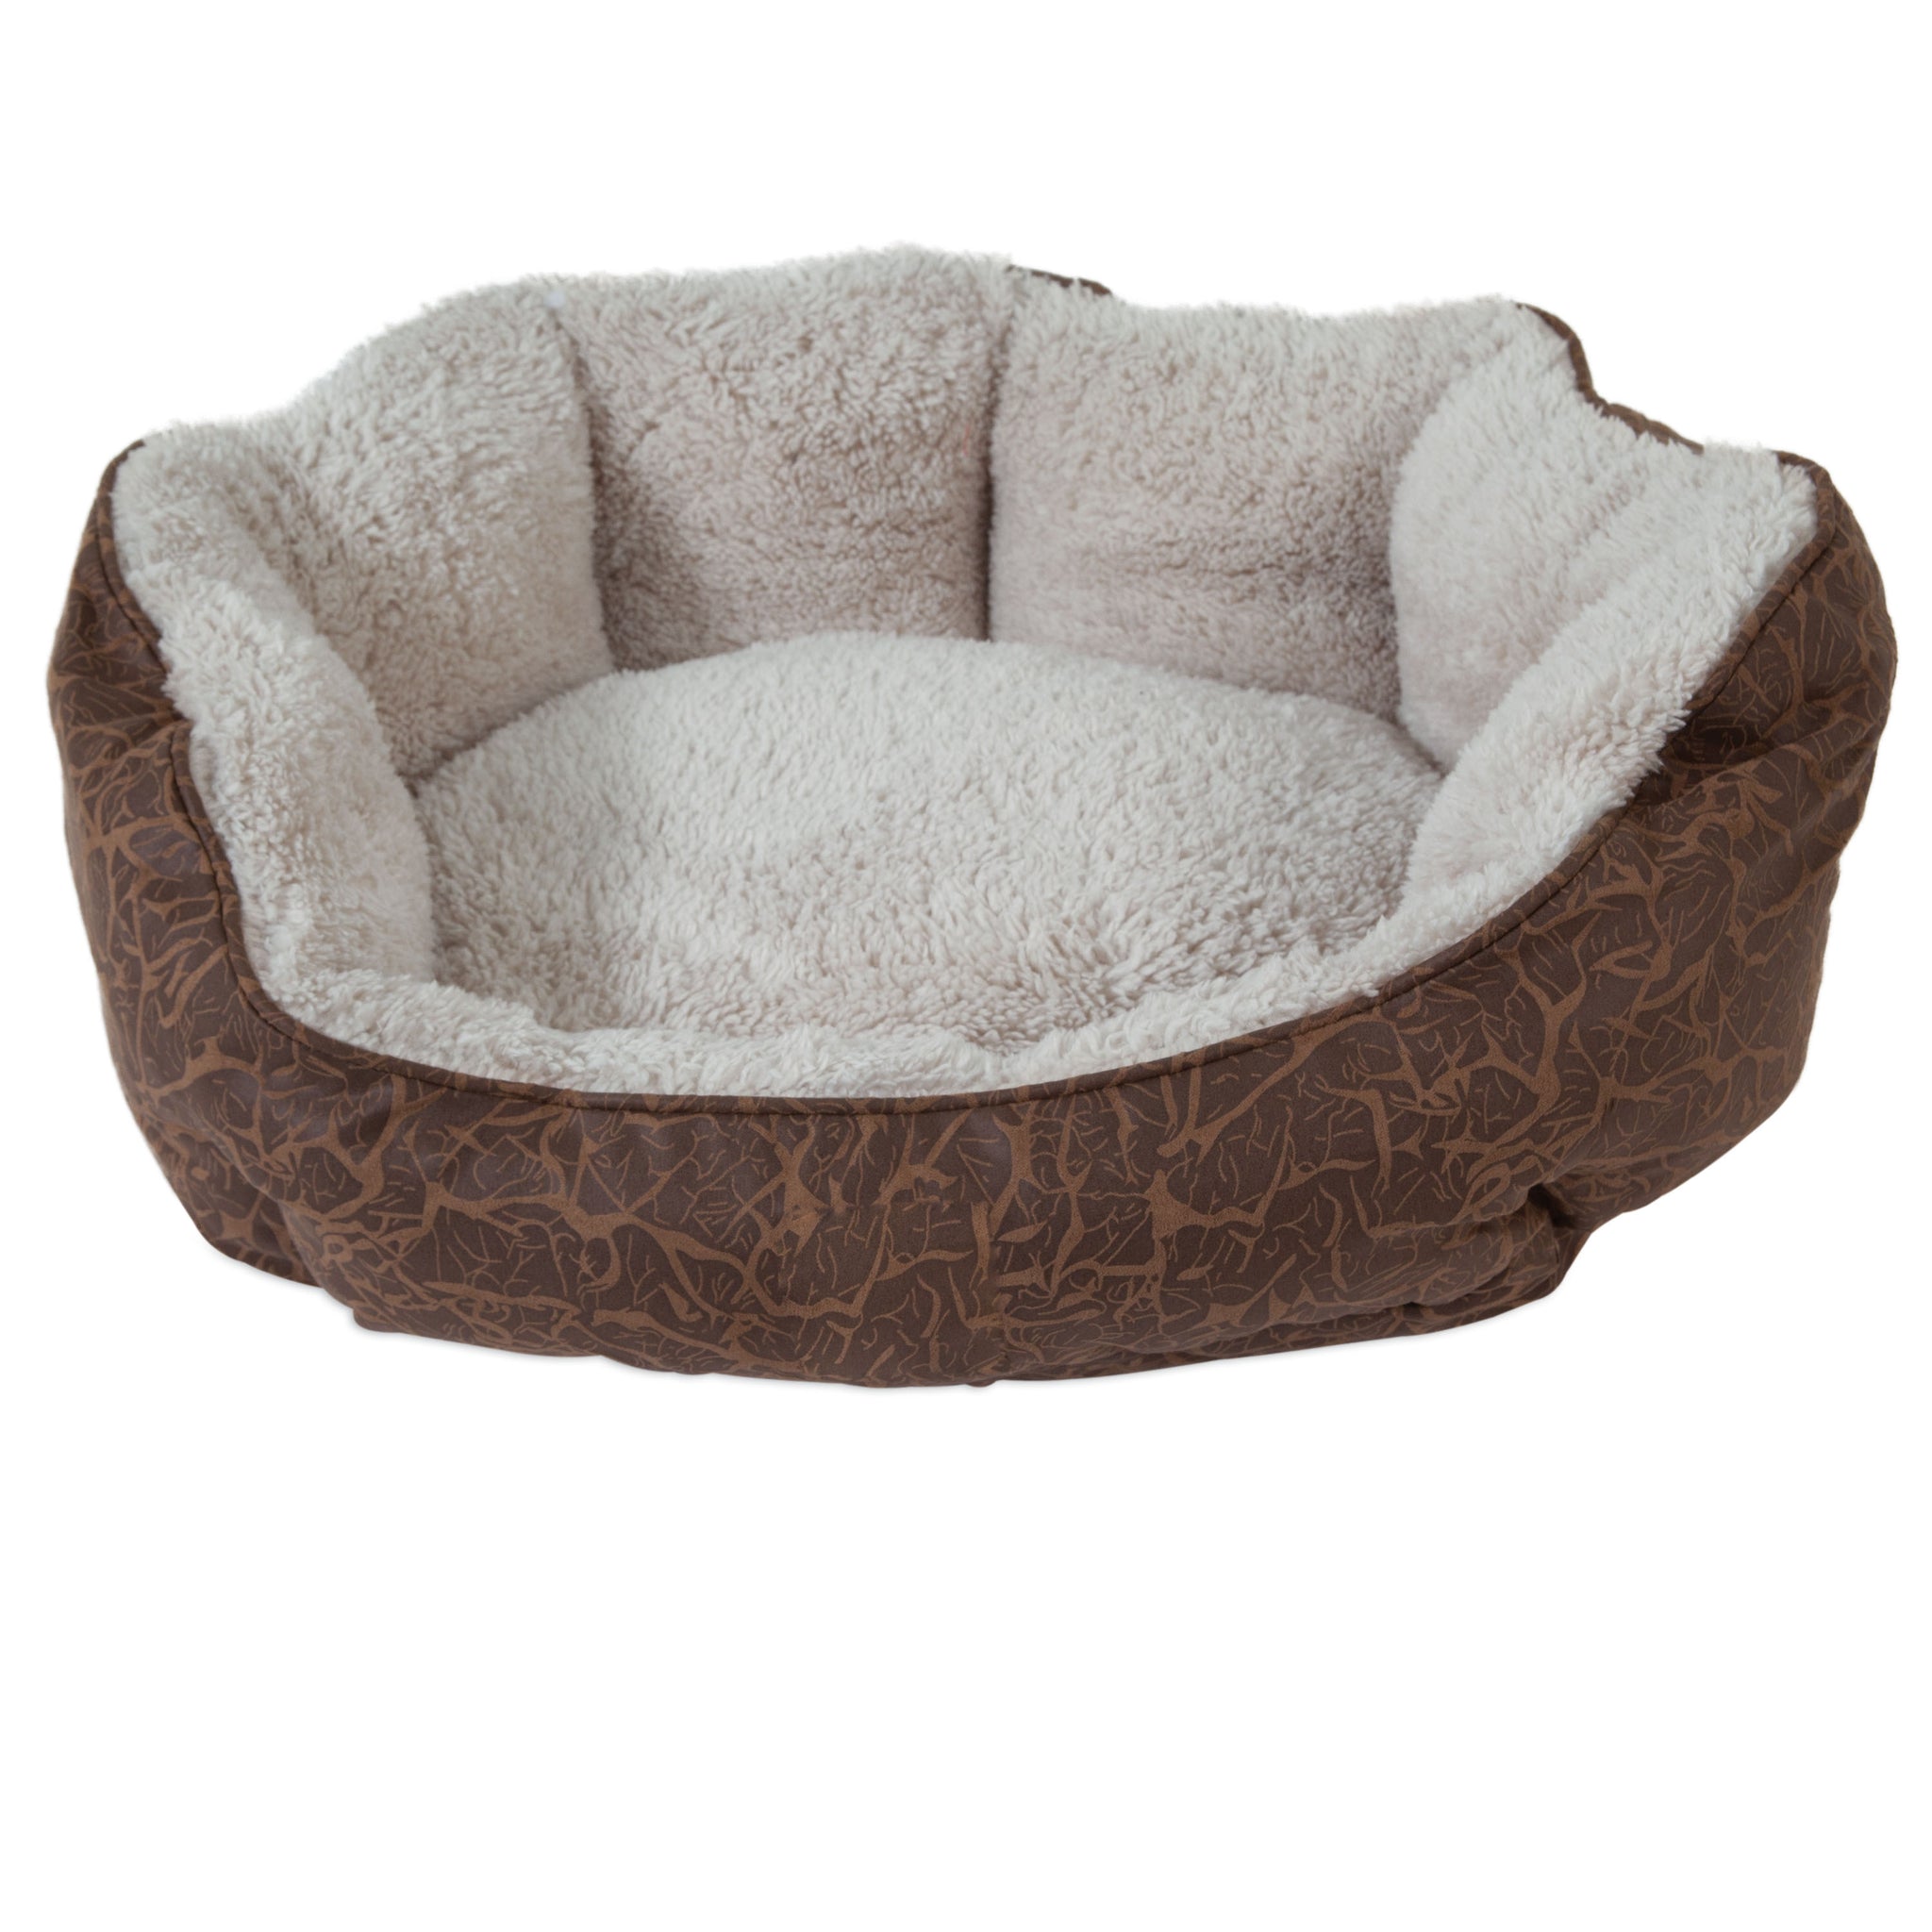 SnooZZy Clamshell Pet Bed